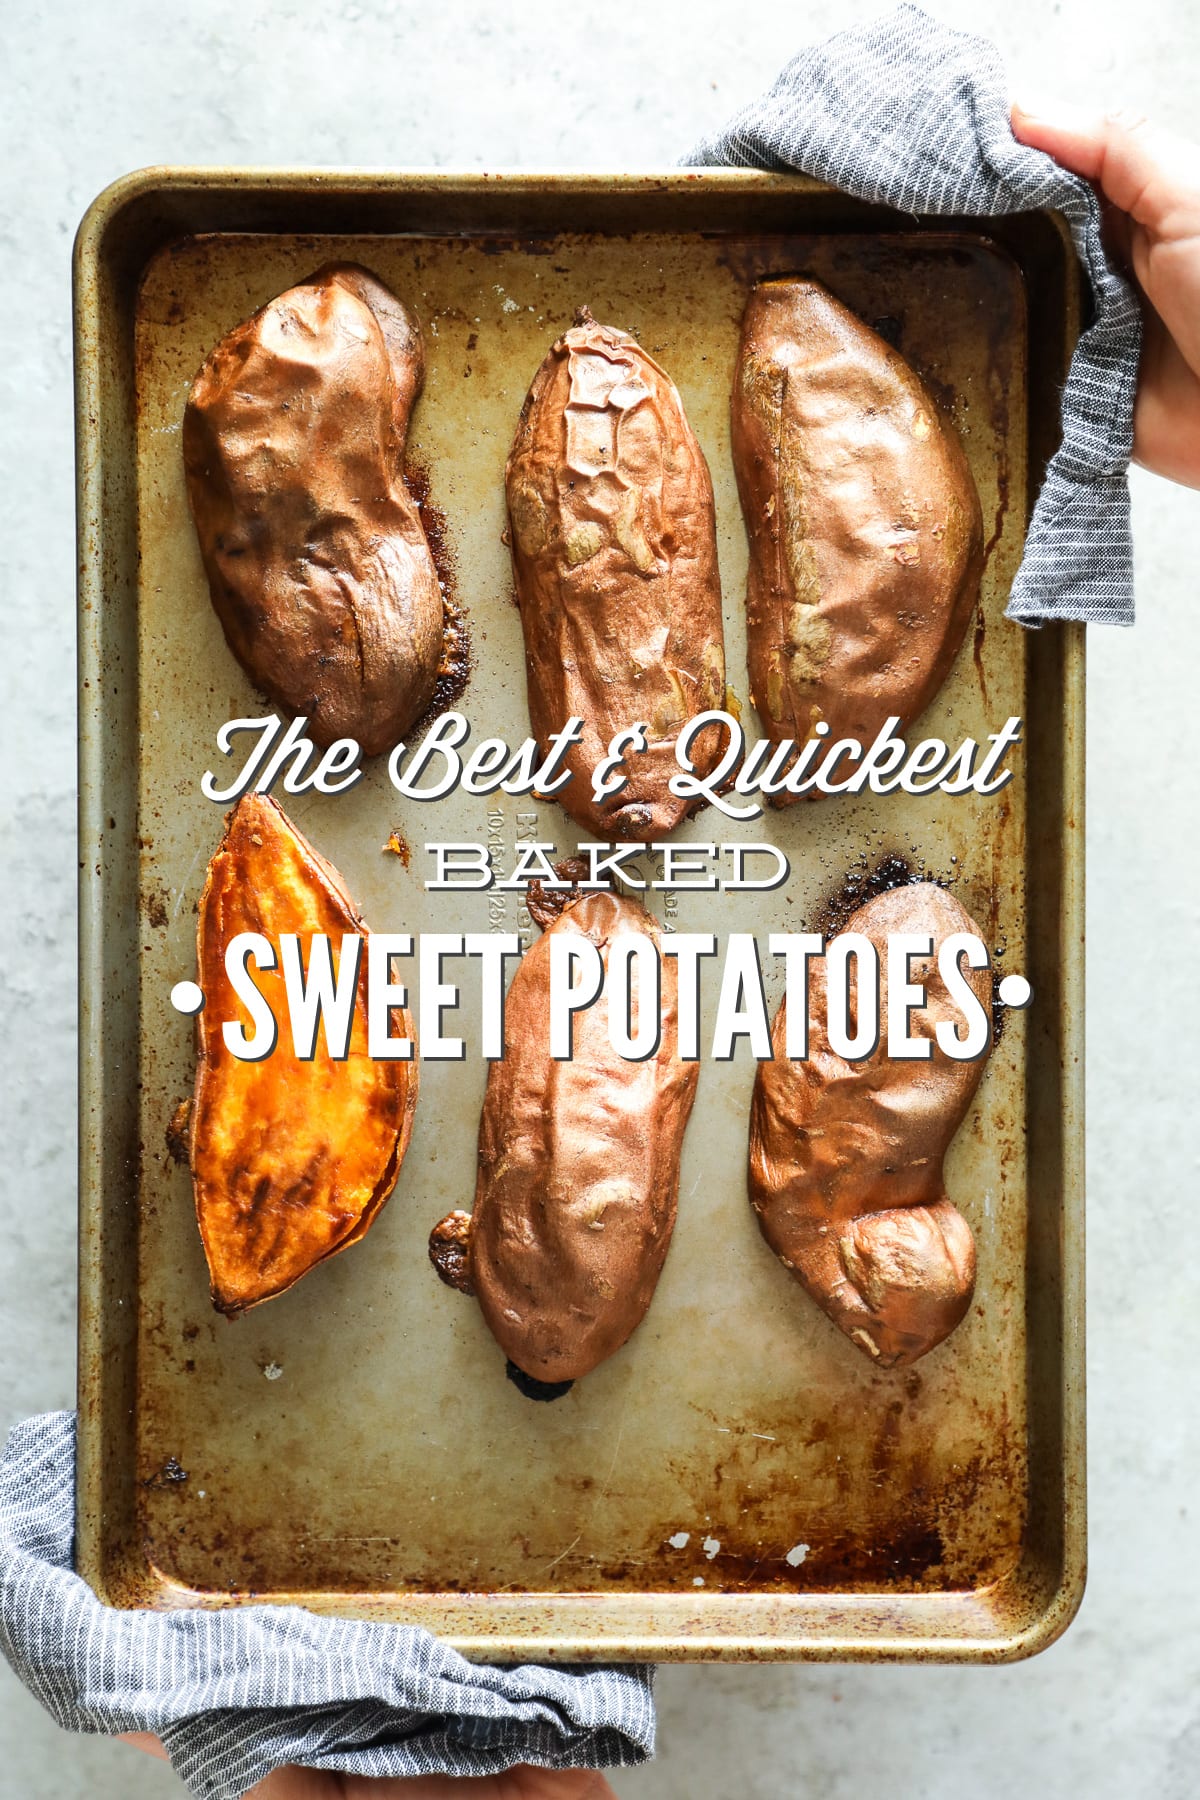 The Best and Quickest Baked Sweet Potatoes